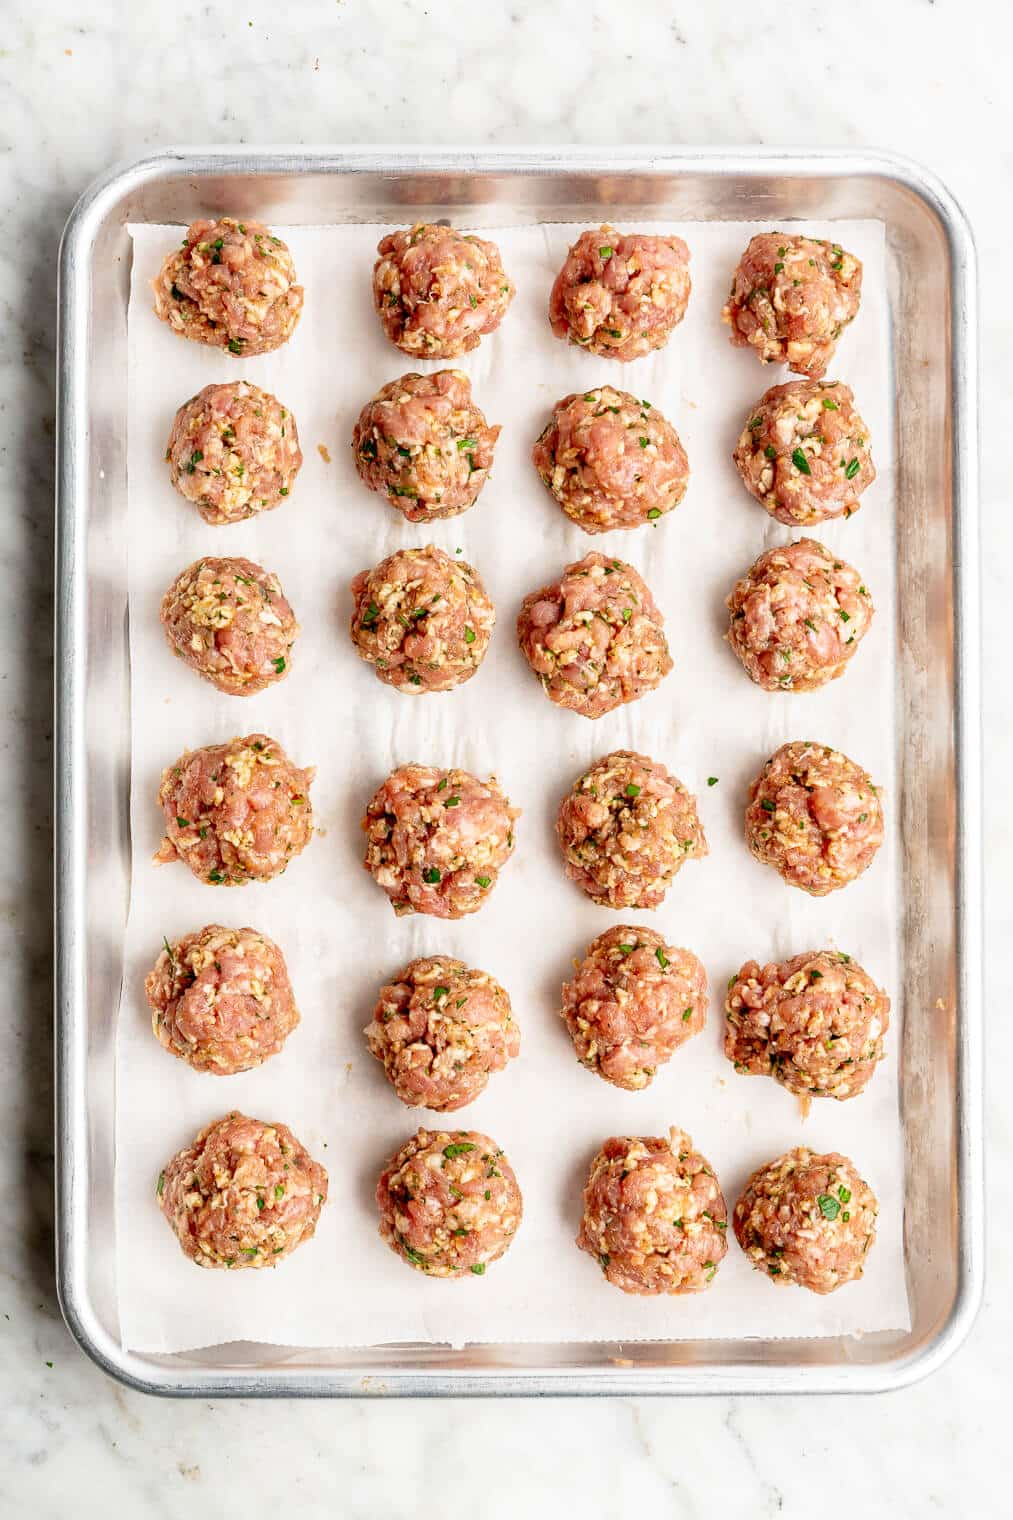 24 Swedish meatballs (raw) lined up on a parchment paper-lined sheet pan before going into the oven.